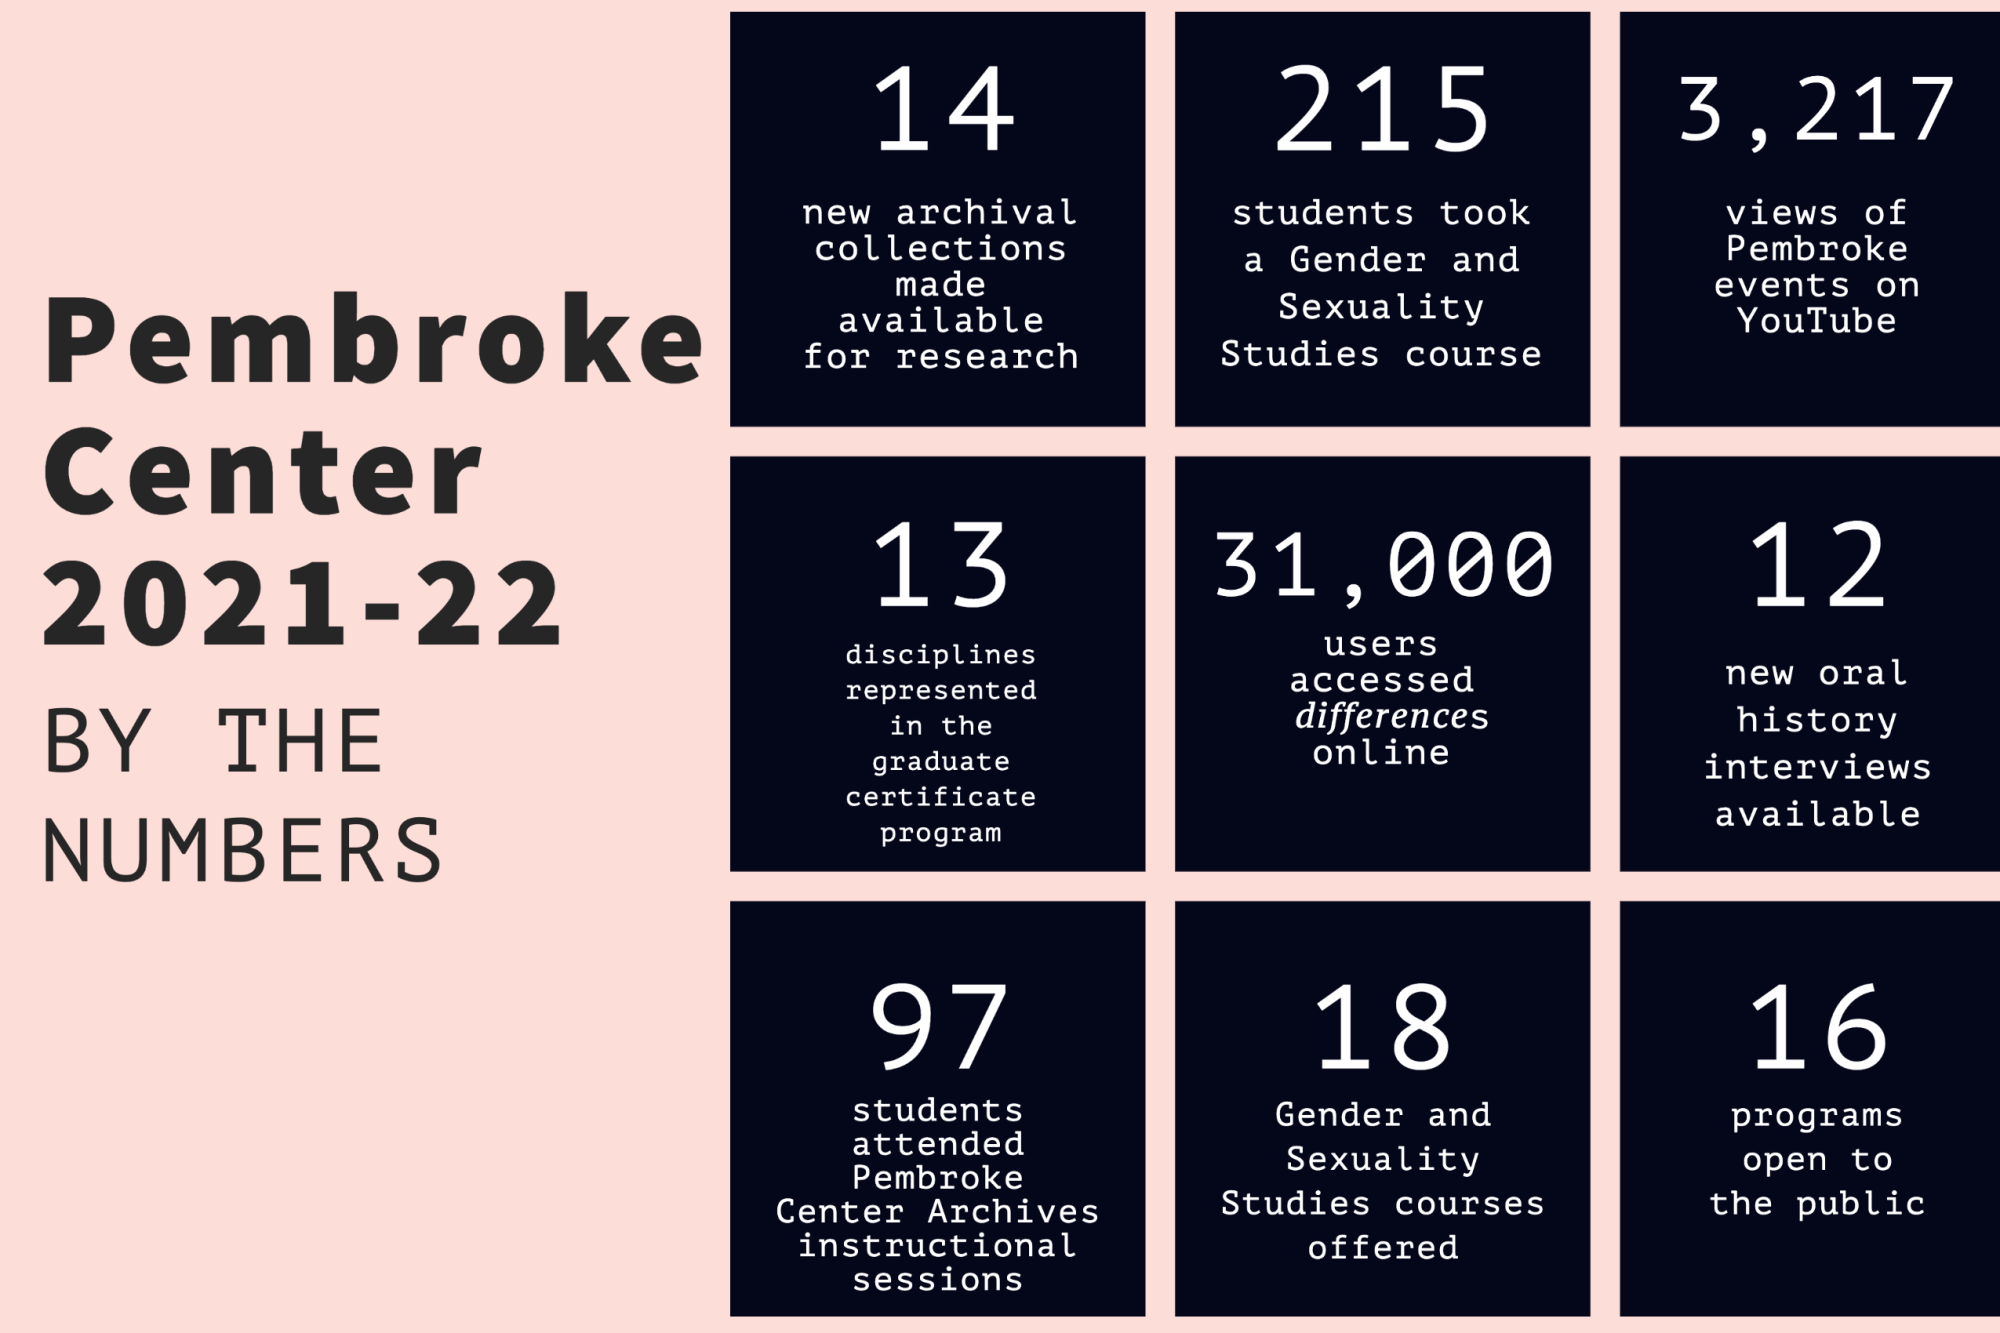 Pembroke Center "By the Numbers" infographic